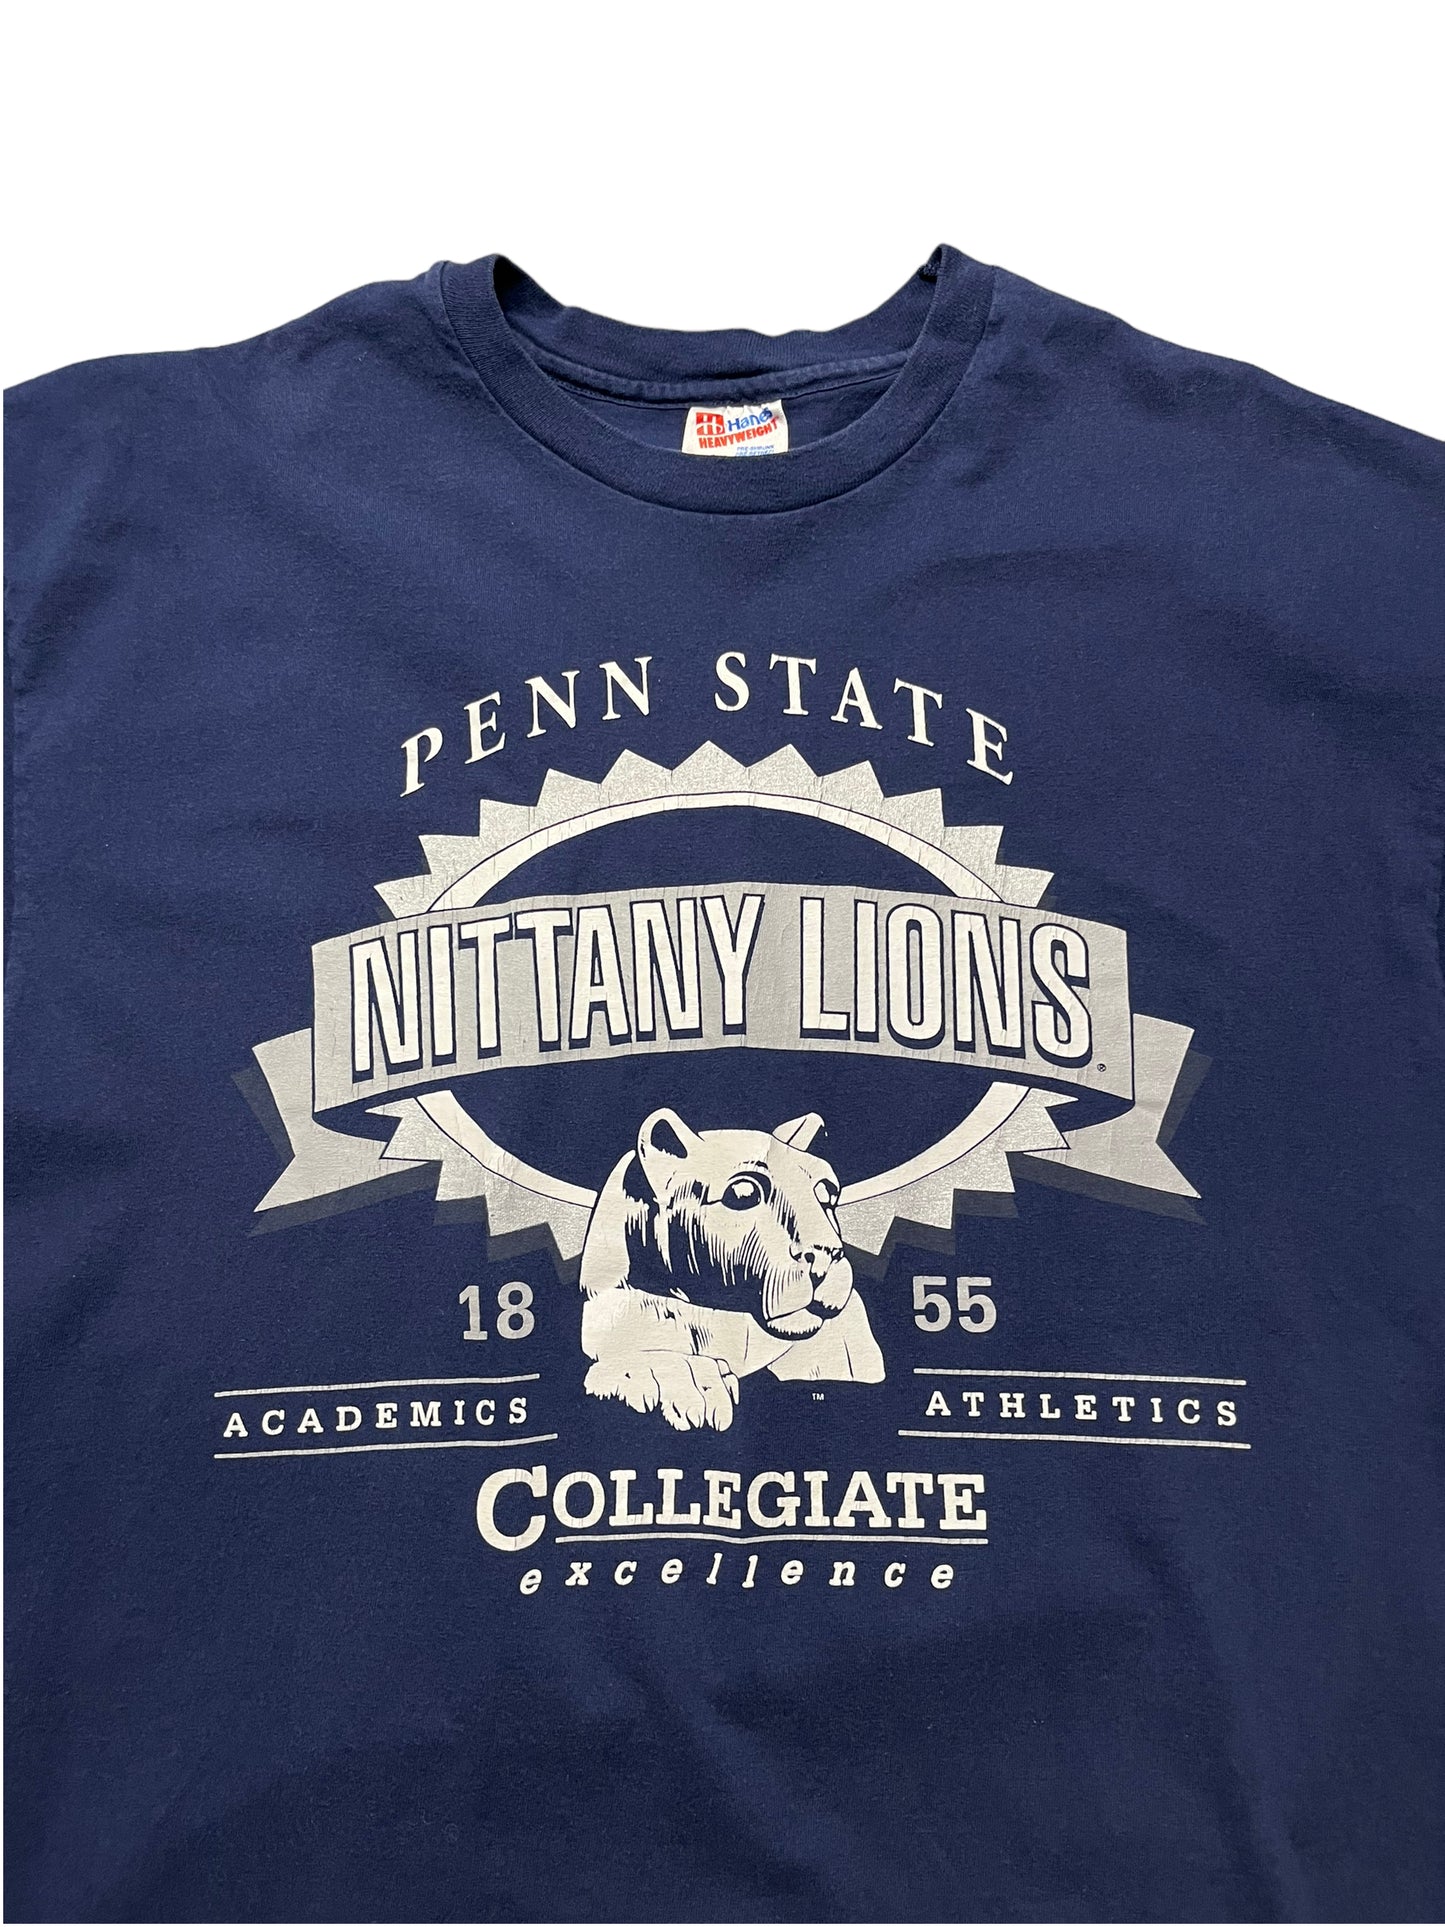 (XL) Vintage Penn State Nittany Lions Tee